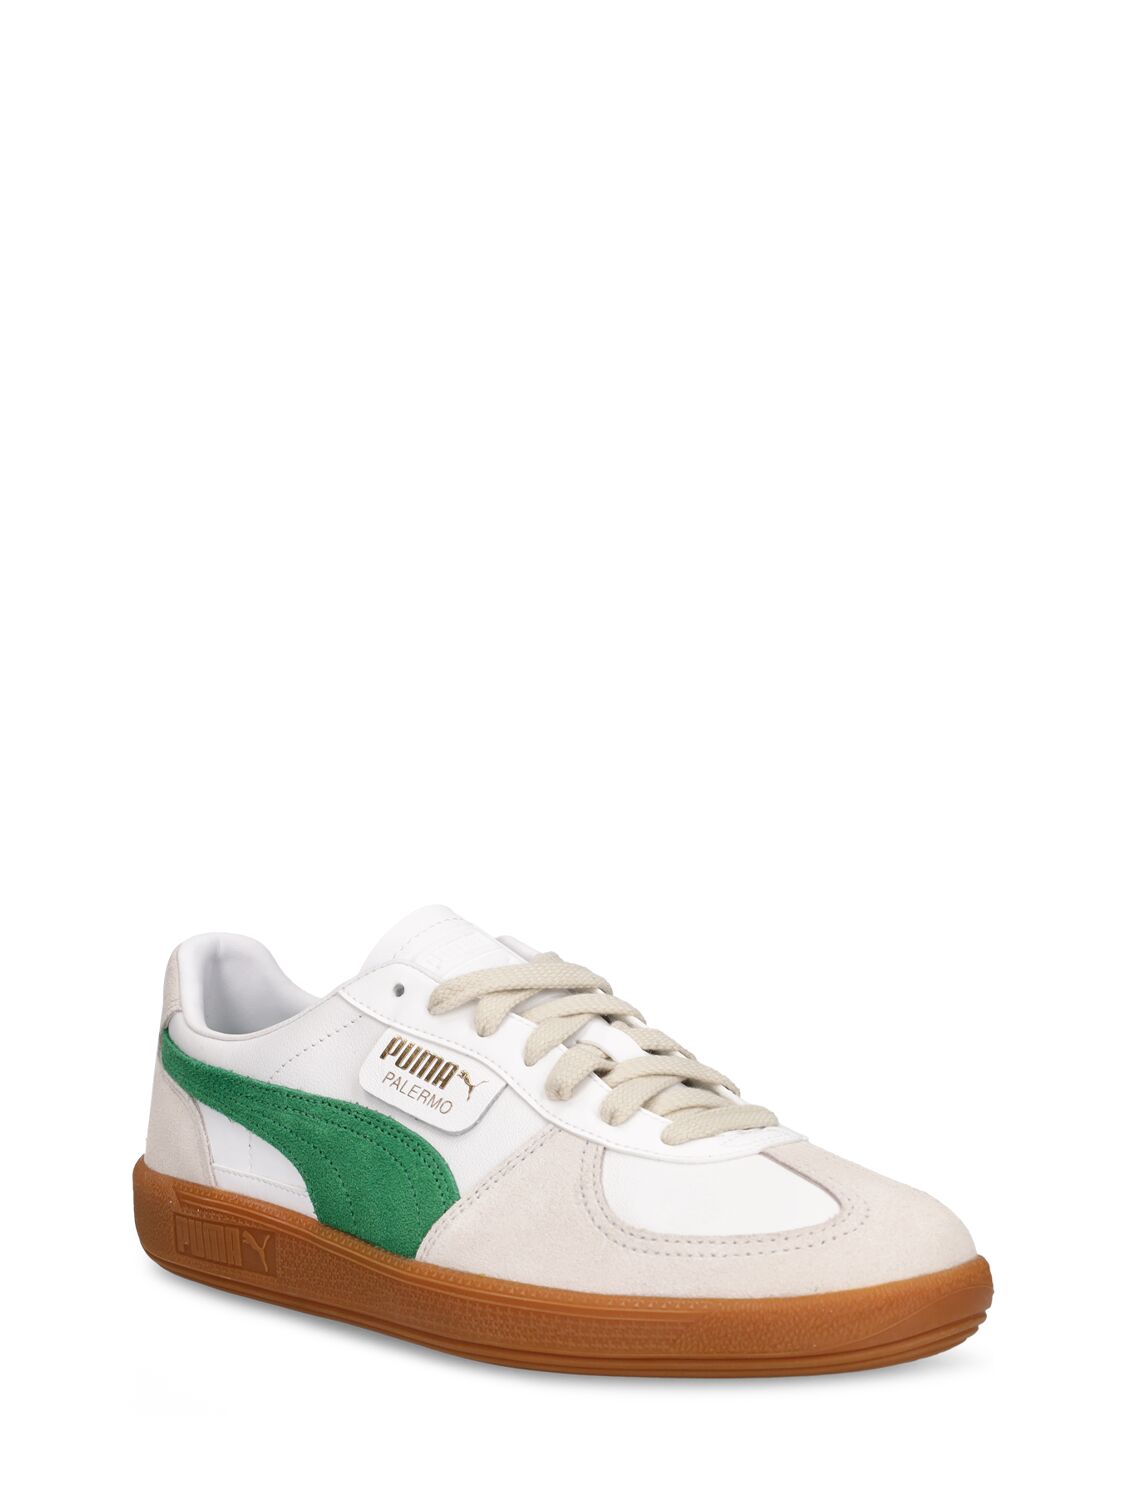 Shop Puma Palermo Sneakers In Archive Green